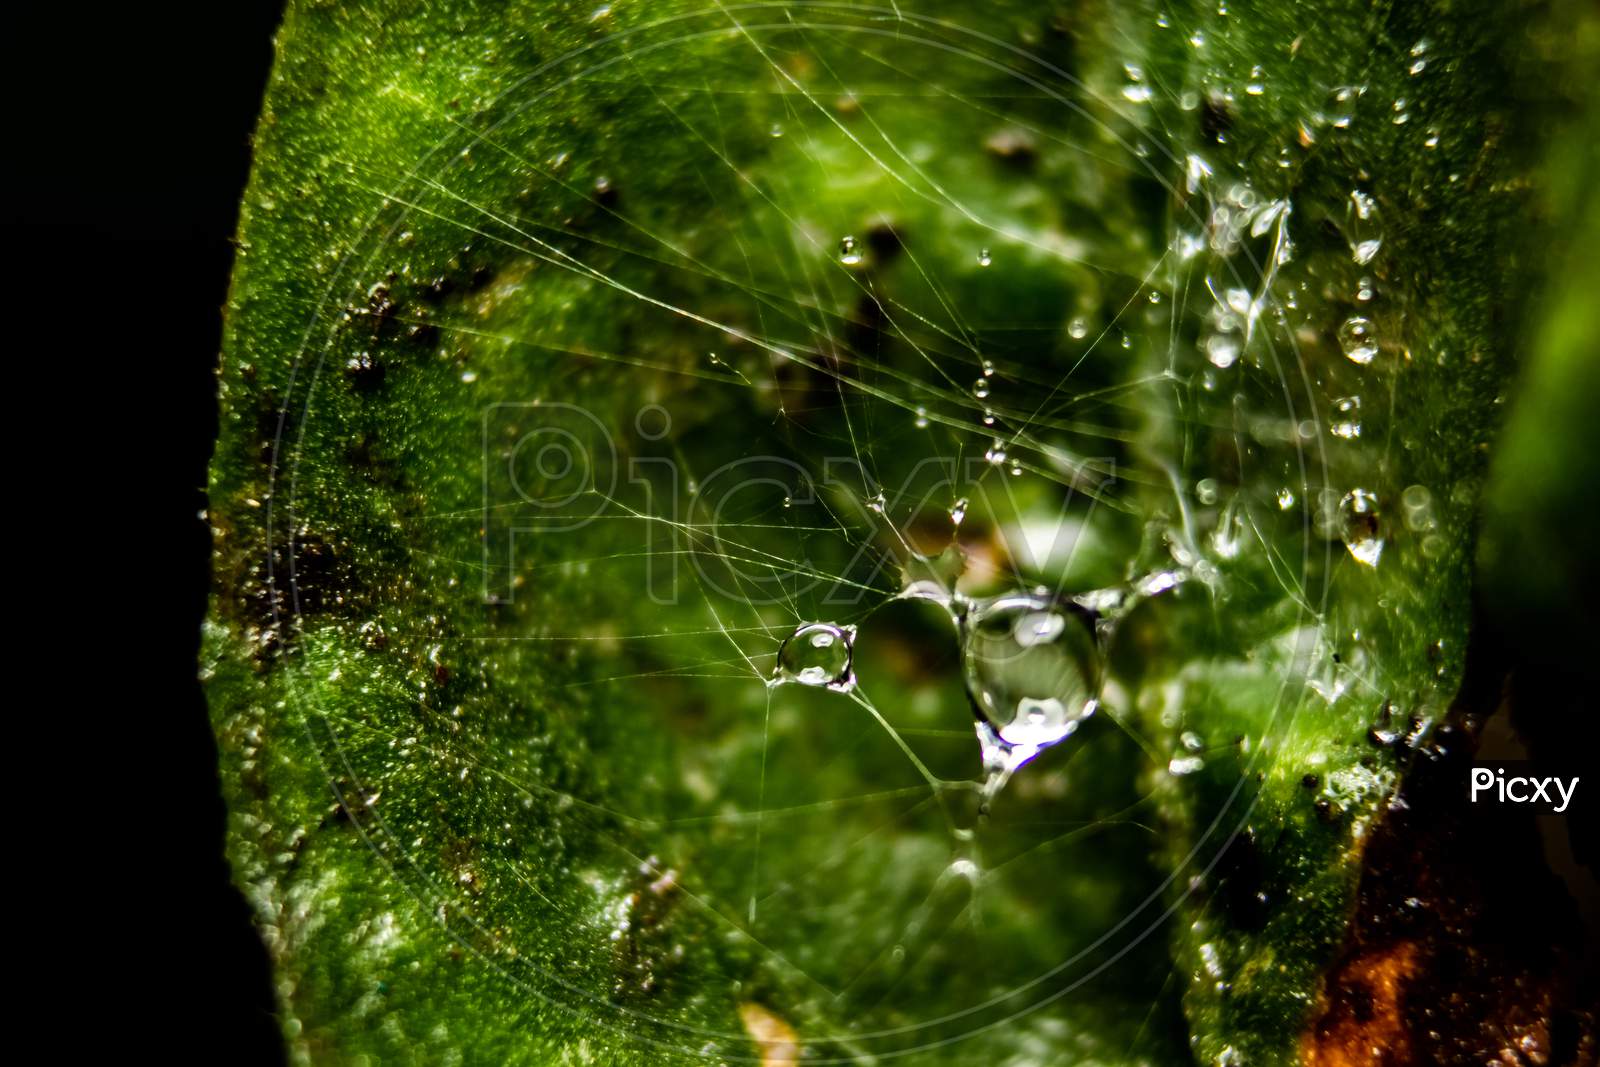 Rain Water Drop On Spider Web With Background Of Plant Leaves. Fresh Grass With Dew Drops Close Up - Spider Net With Water Drops.